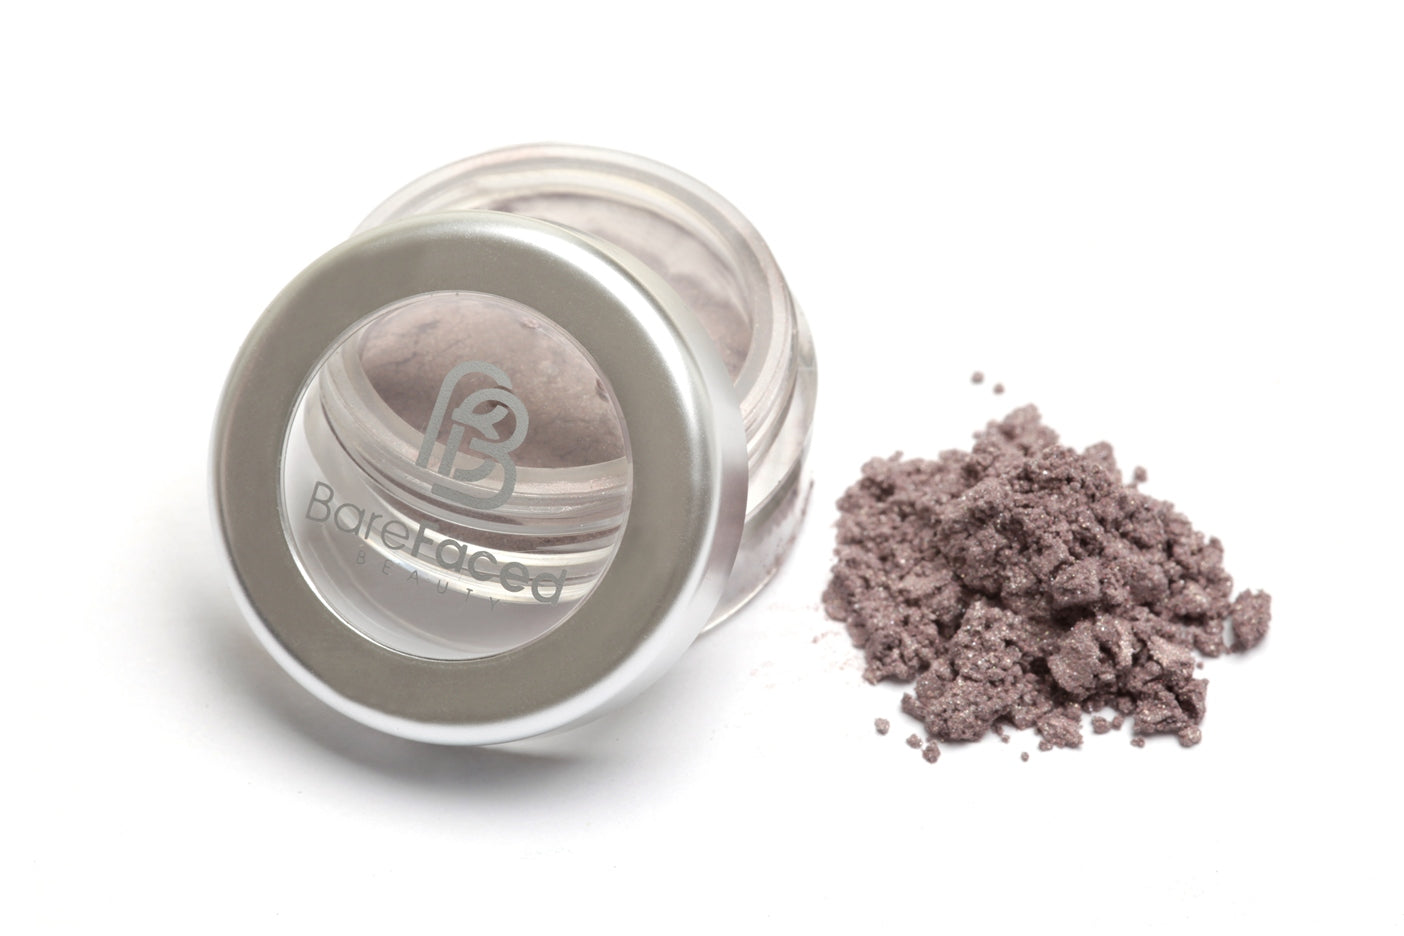 A small round pot of mineral eyeshadow, with a swatch of the powder next to it showing a light shimmery mauve shade